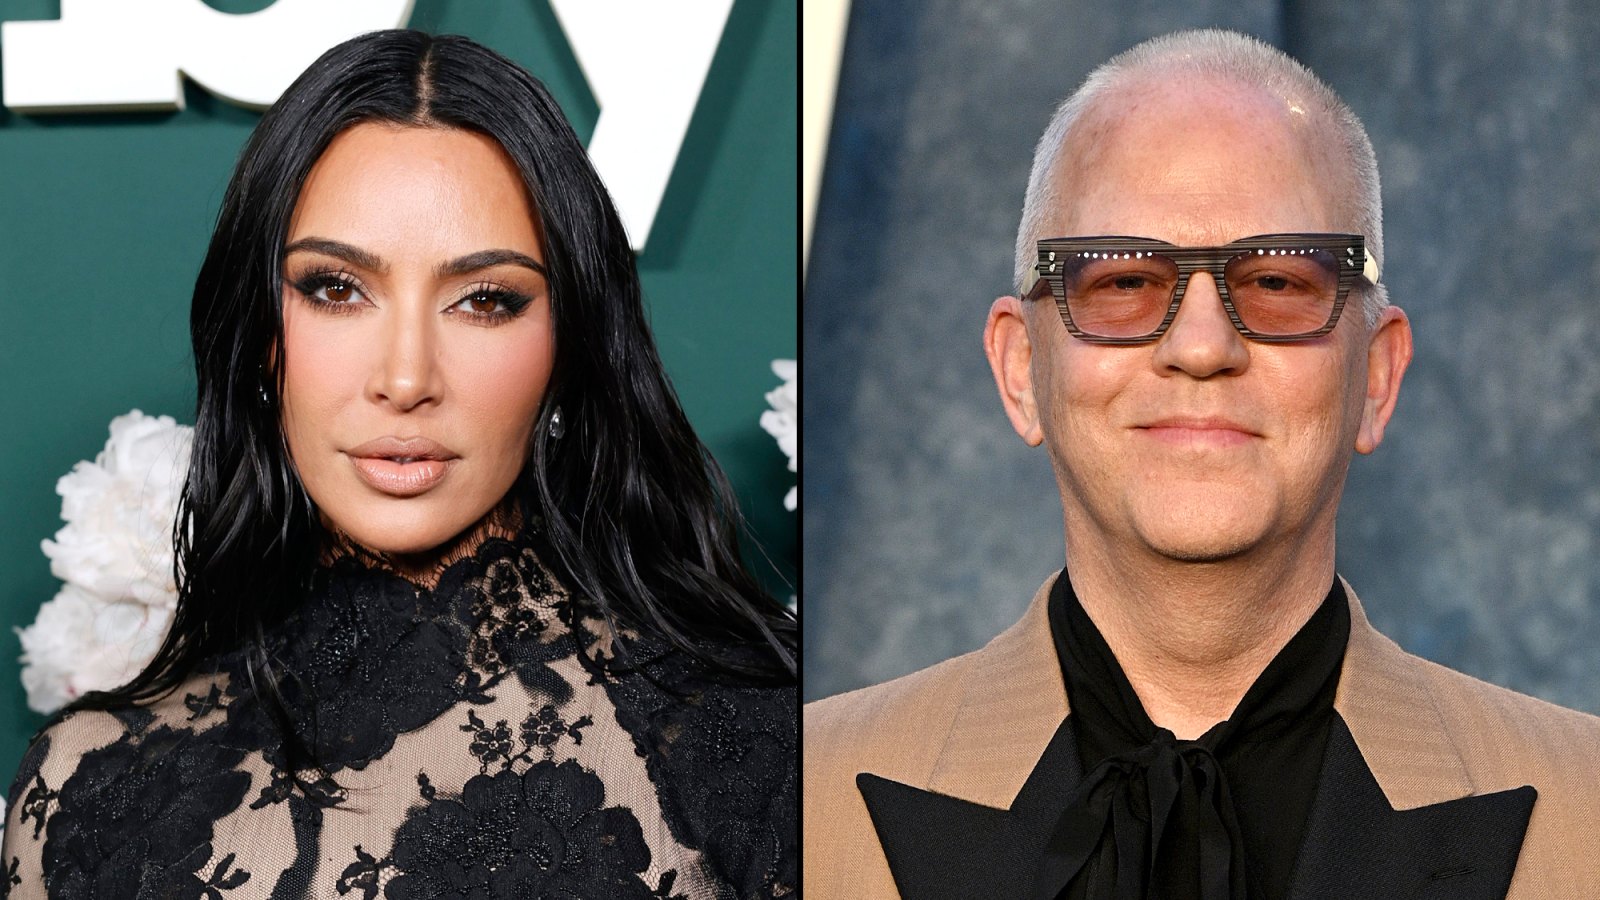 Kim Kardashian and Other ‘AHS,’ ‘Feud’ and ‘Dahmer’ Stars Narrate Ryan Murphy’s Bel Air House Tour